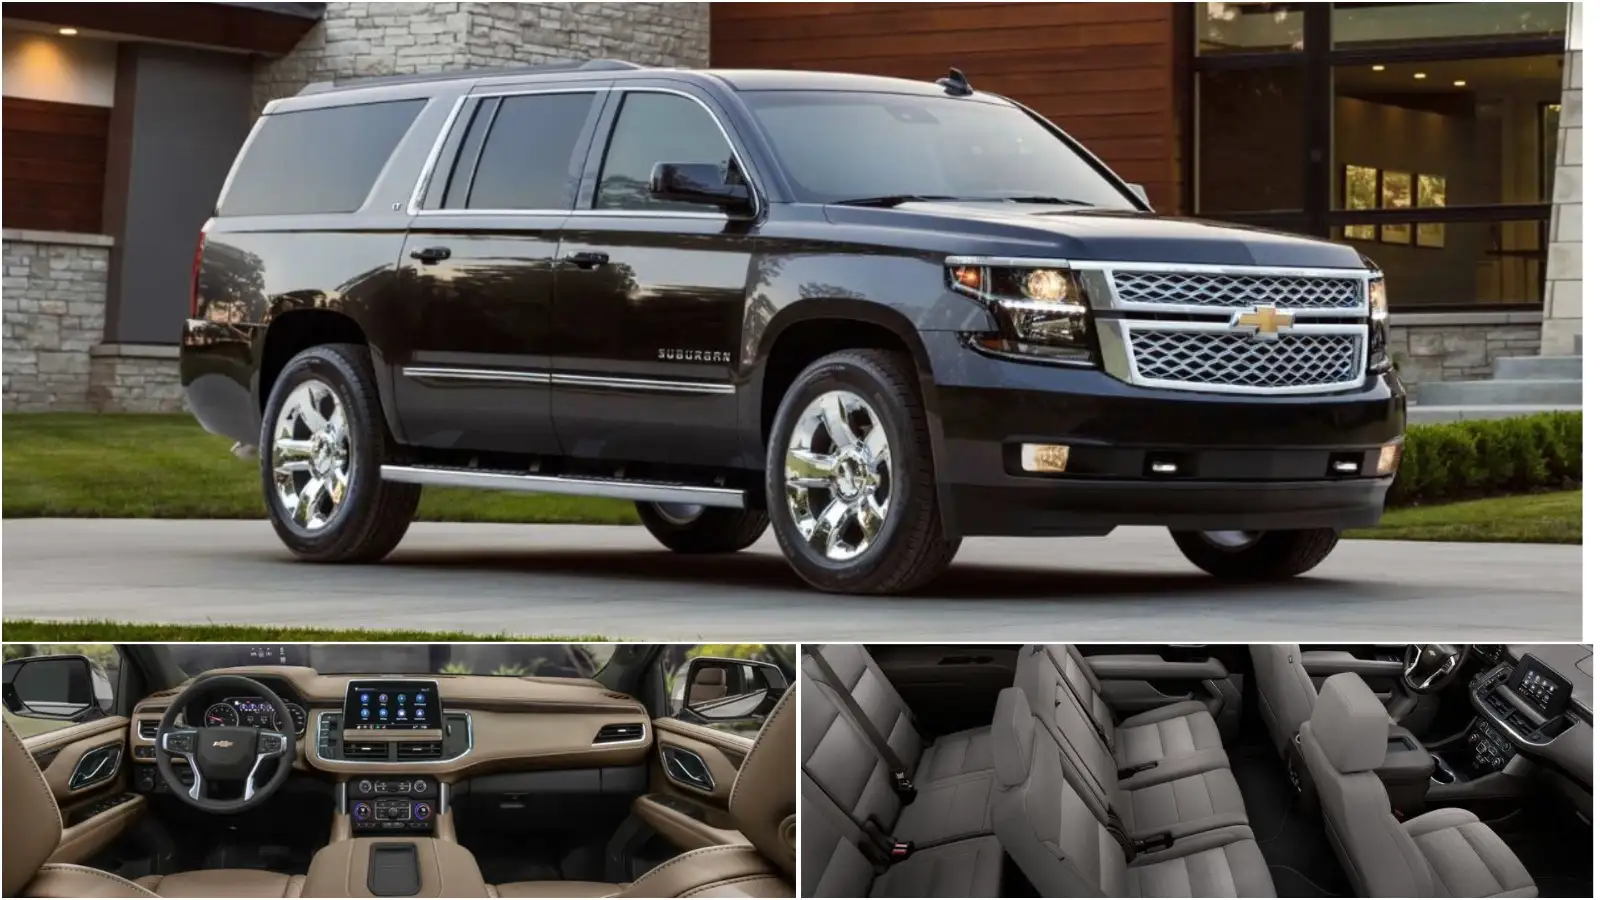 Chevrolet Suburban 2024 On Road Price in India, length, Interior, Seating Capacity, Mileage, Top Speed, Features, Engine Specifications and Interior Design